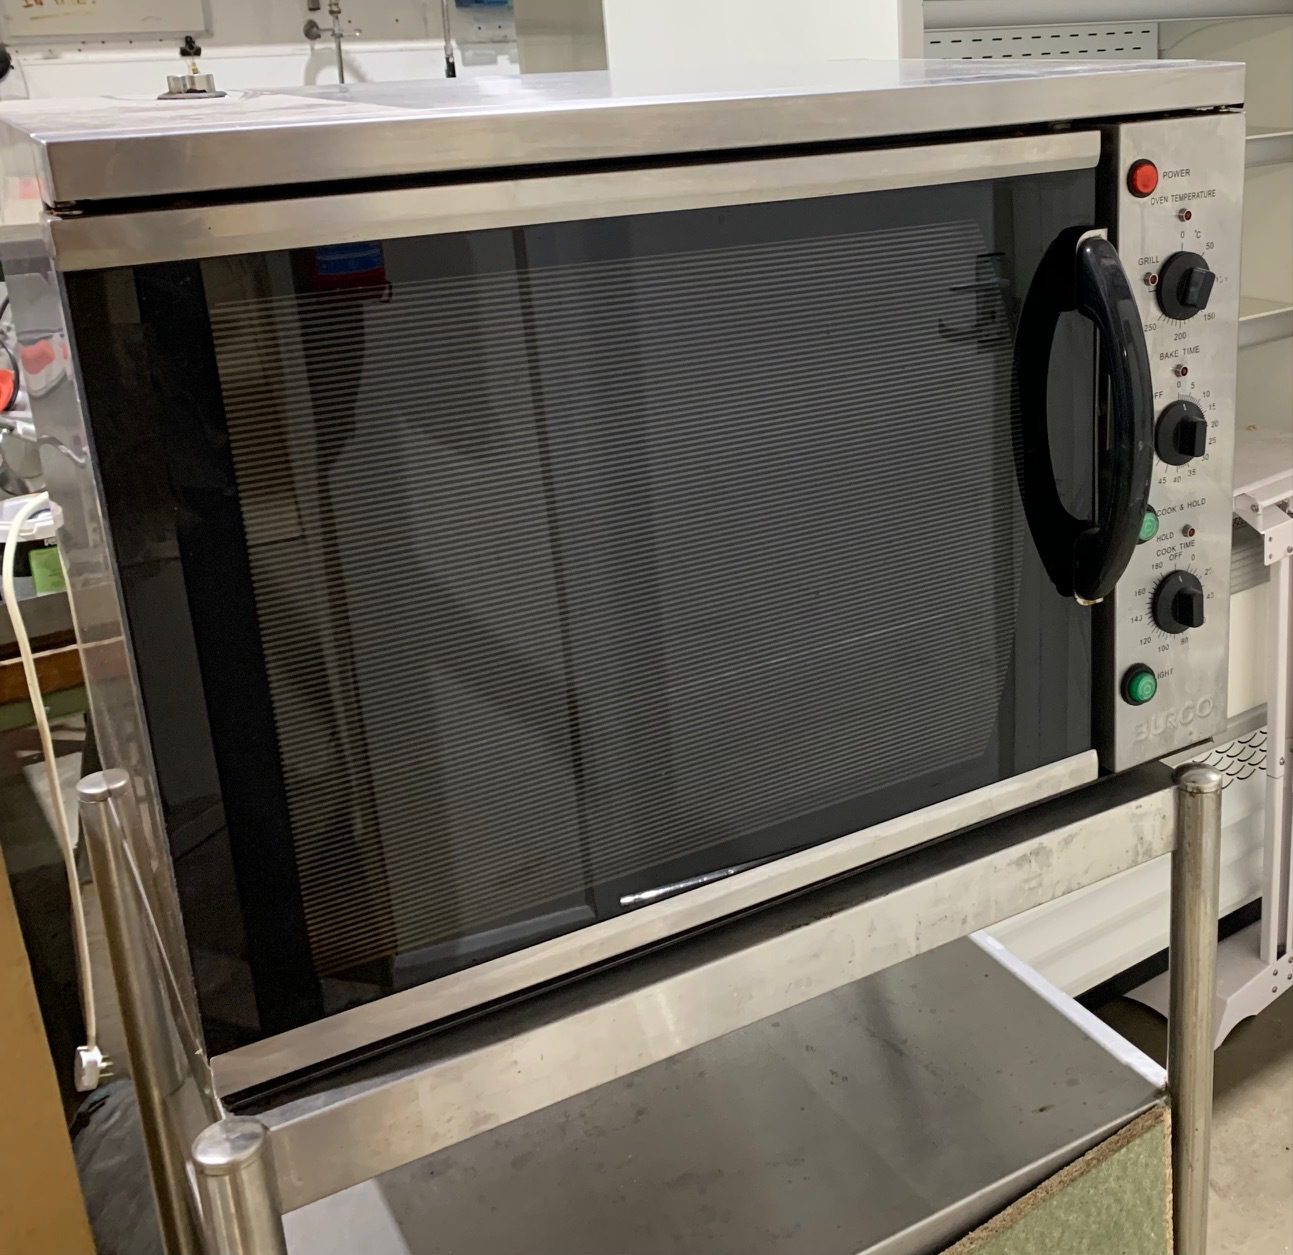 Burco electric table top convection oven